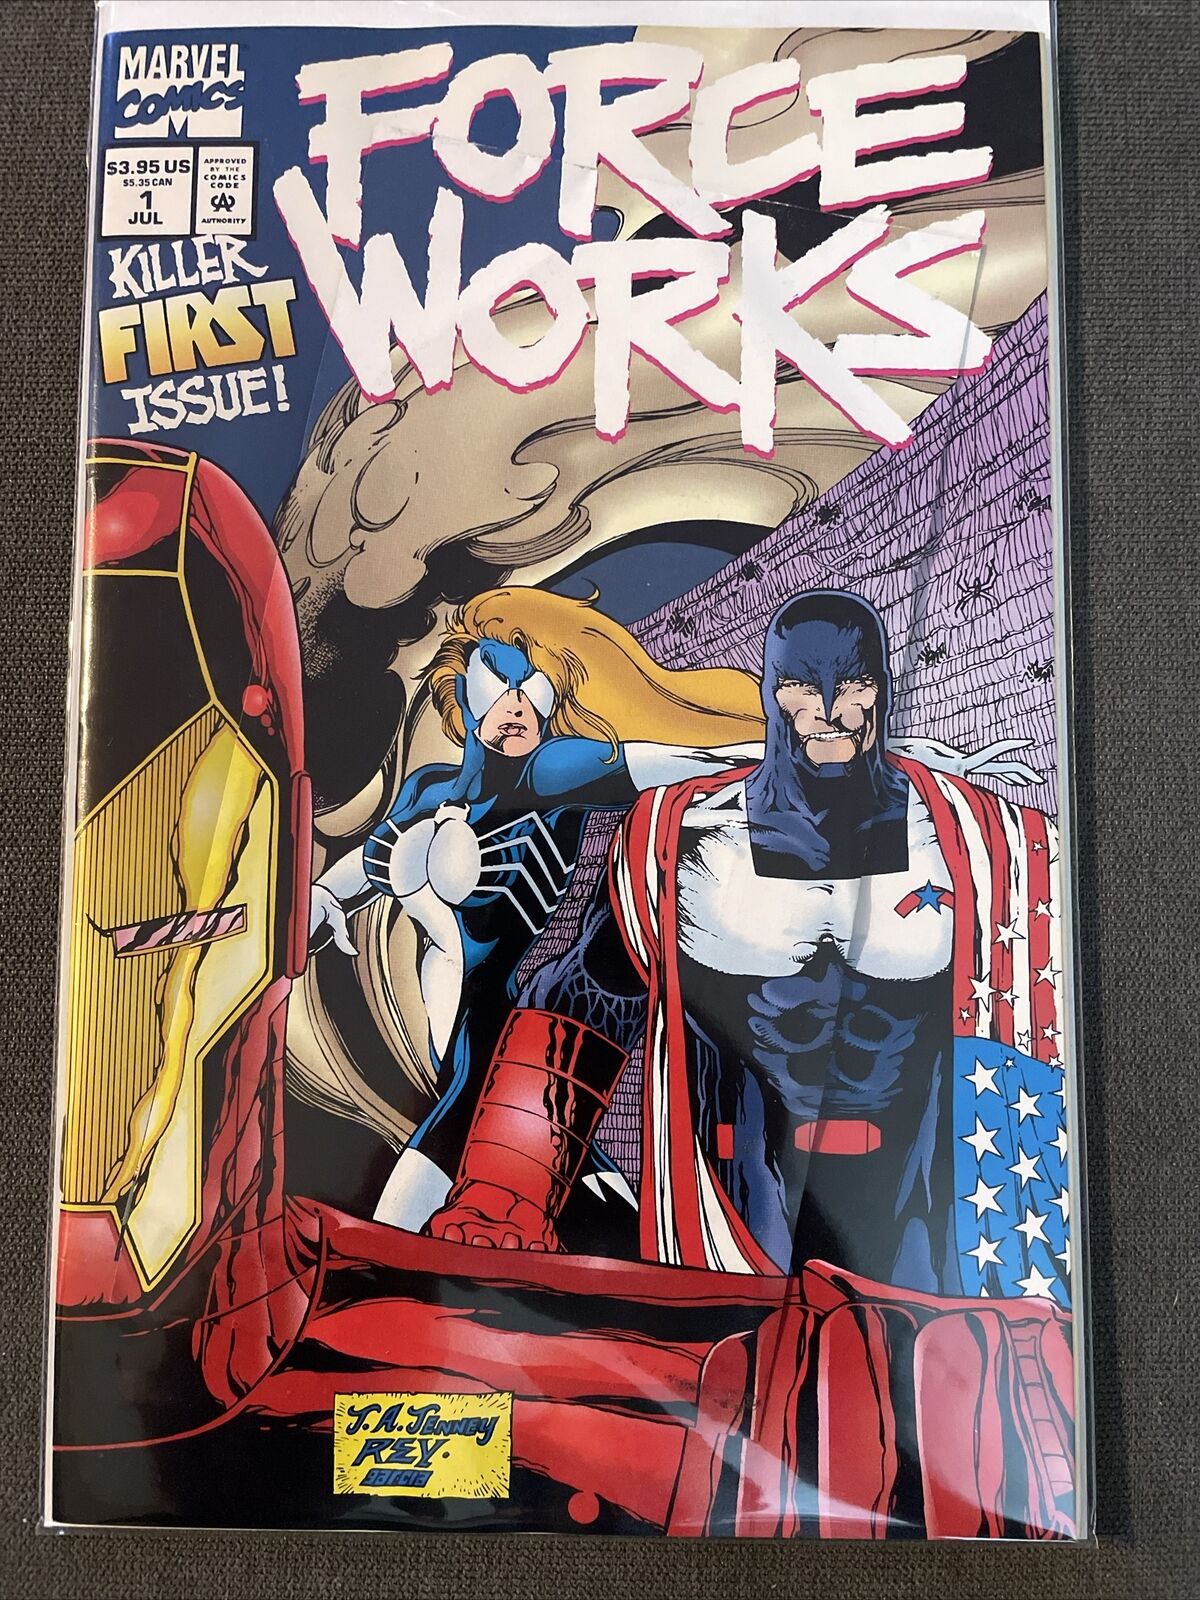 Marvel - FORCE WORKS #1 (Great Condition) bagged and boarded